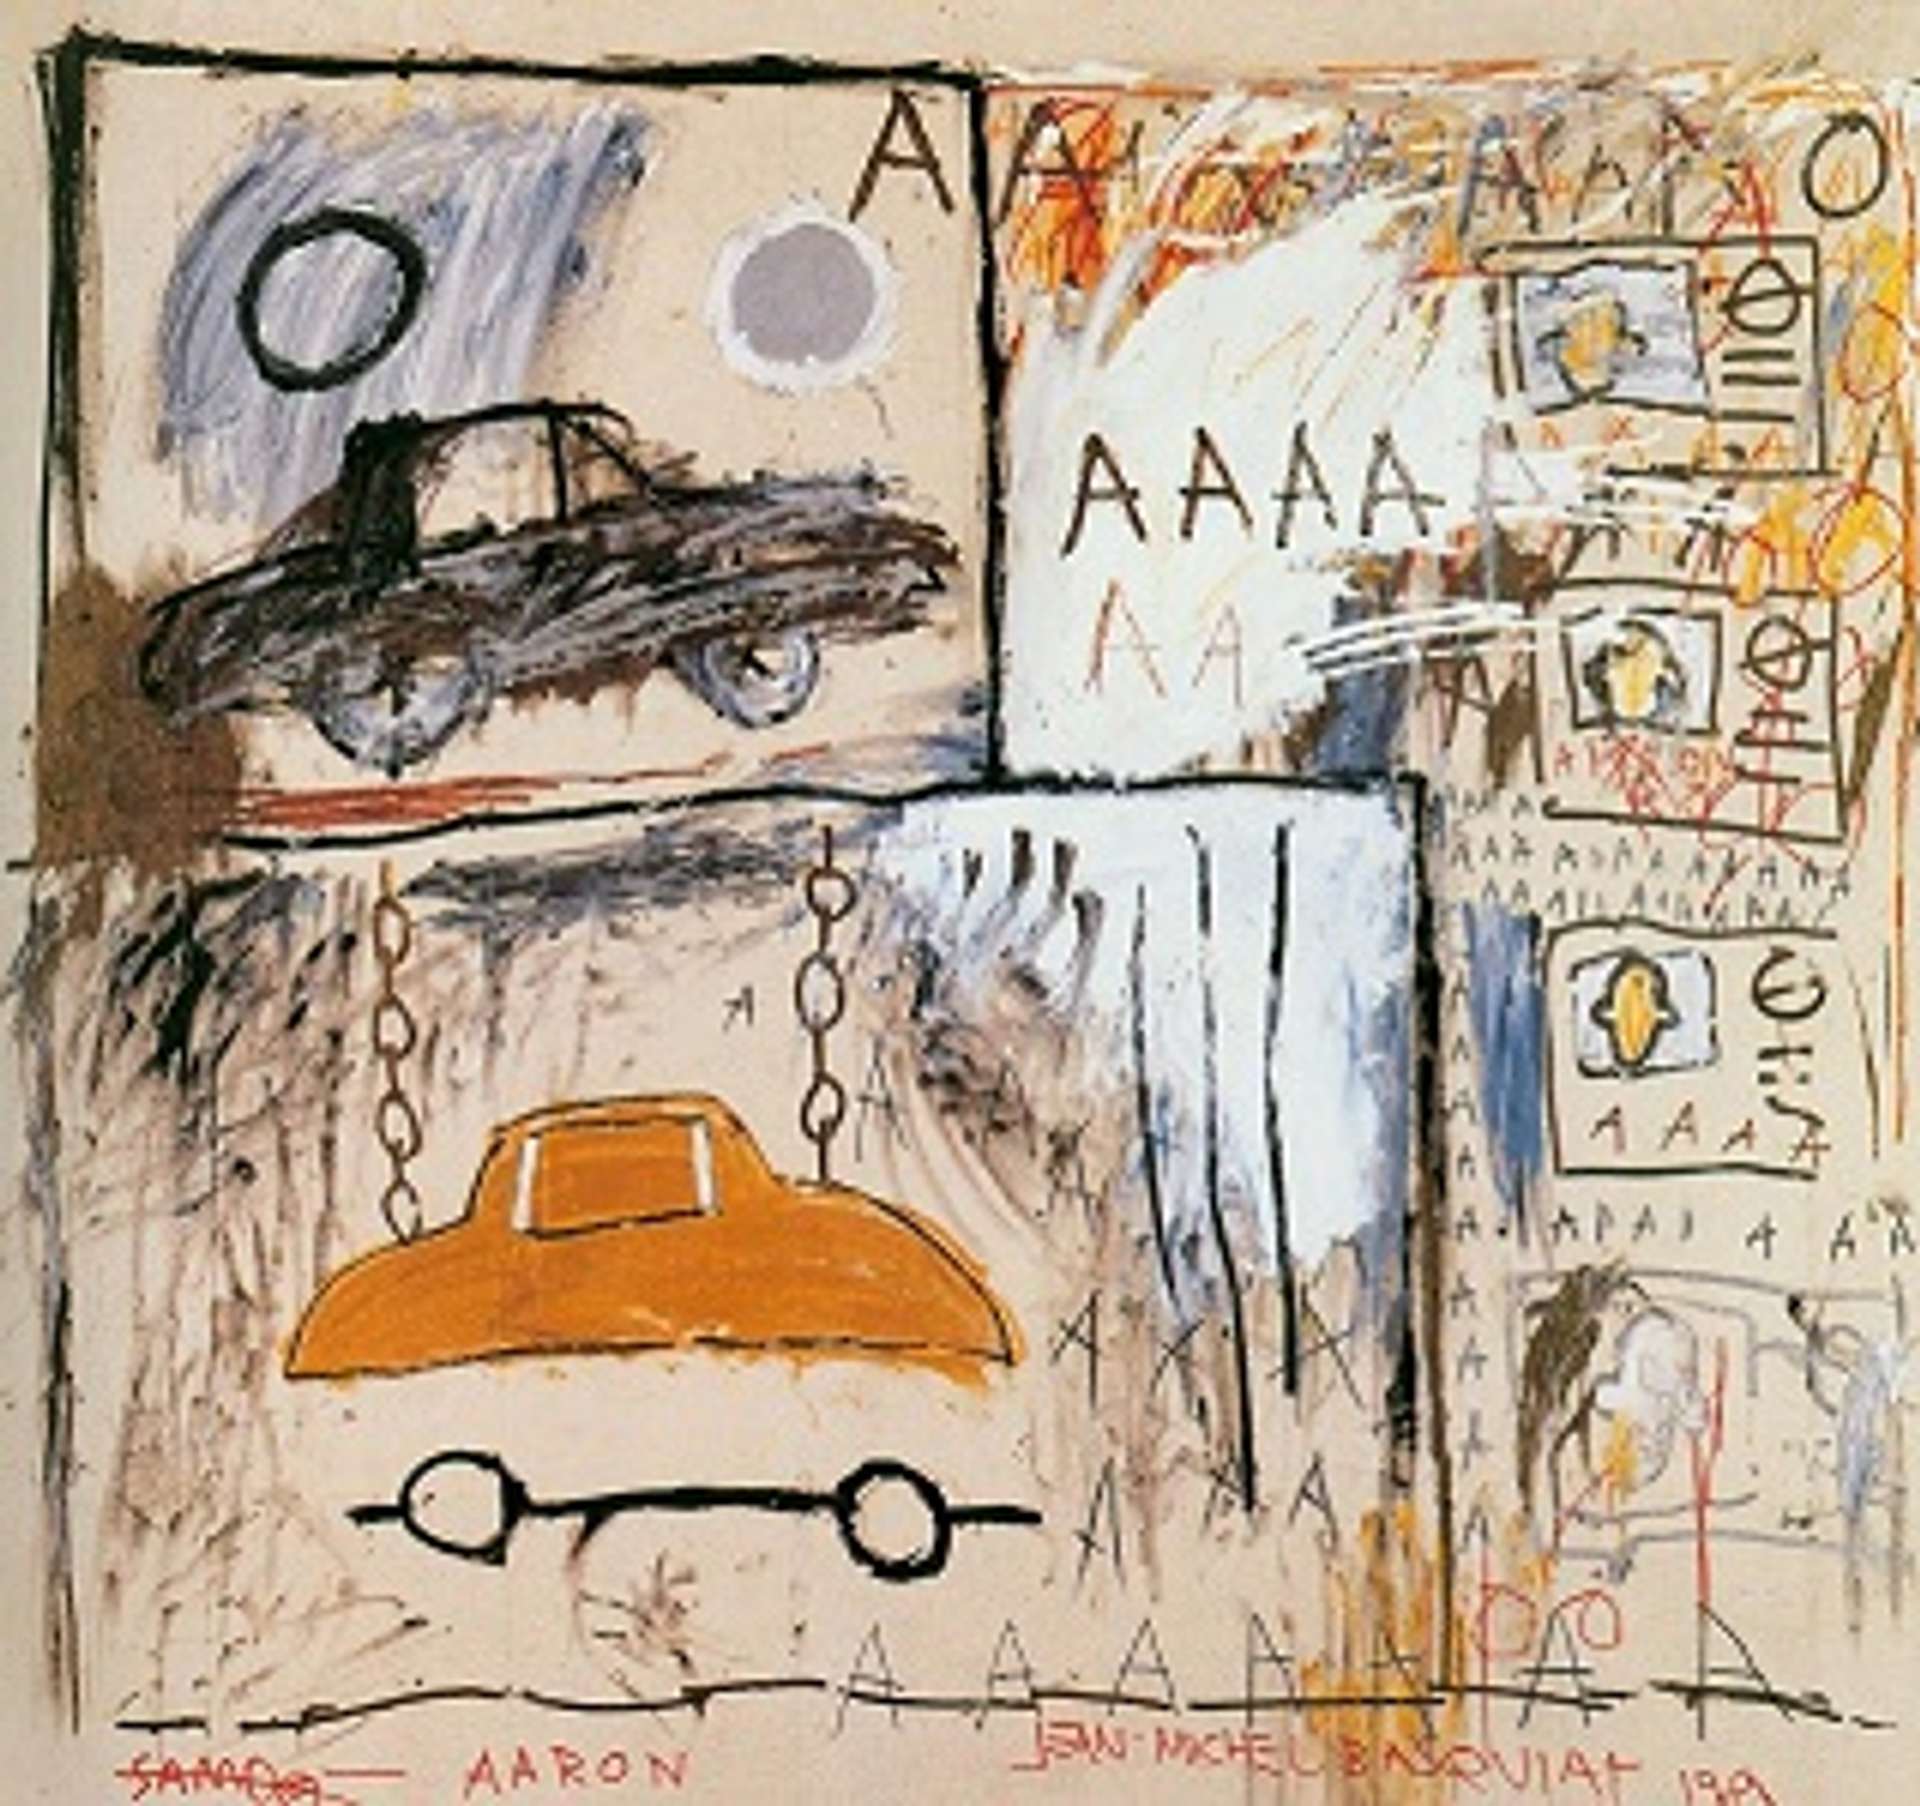 An image of the artwork Cadillac Moon by Basquiat. It shows two cars, boxed in, alongside Basquiat’s signature scribbles. The letter A features extensively throughout the artwork.